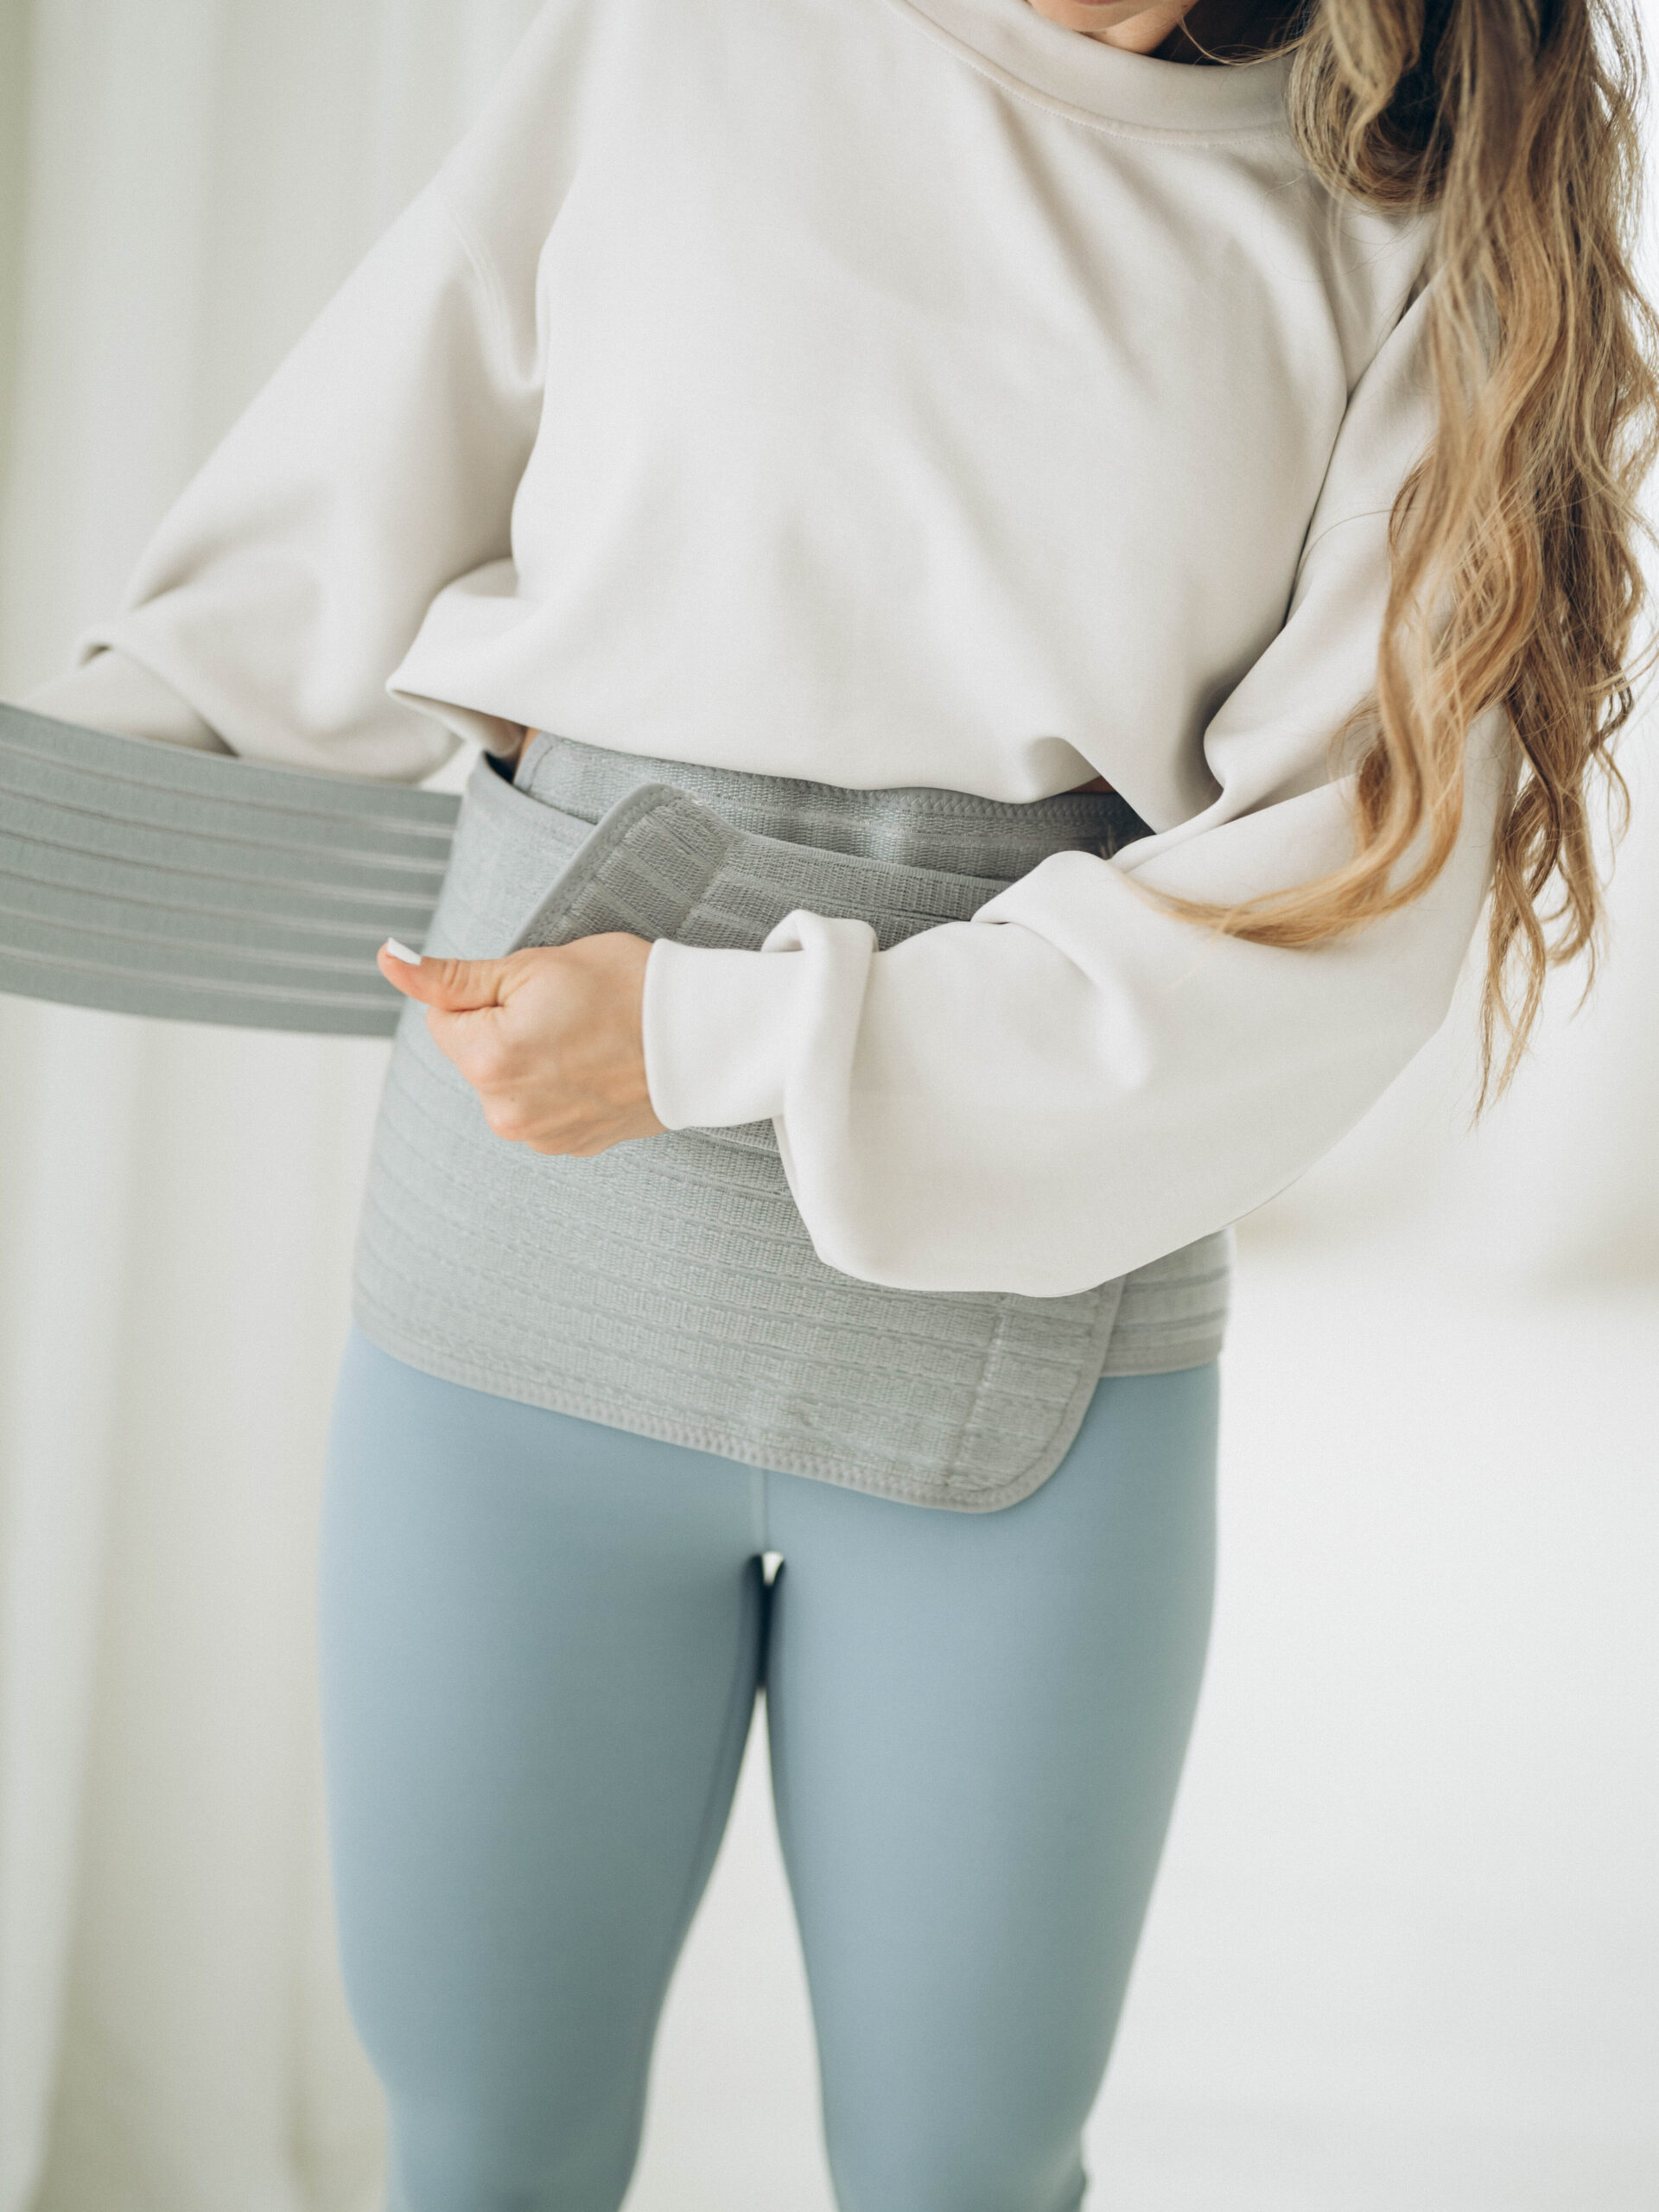 Postpartum support belts and garments